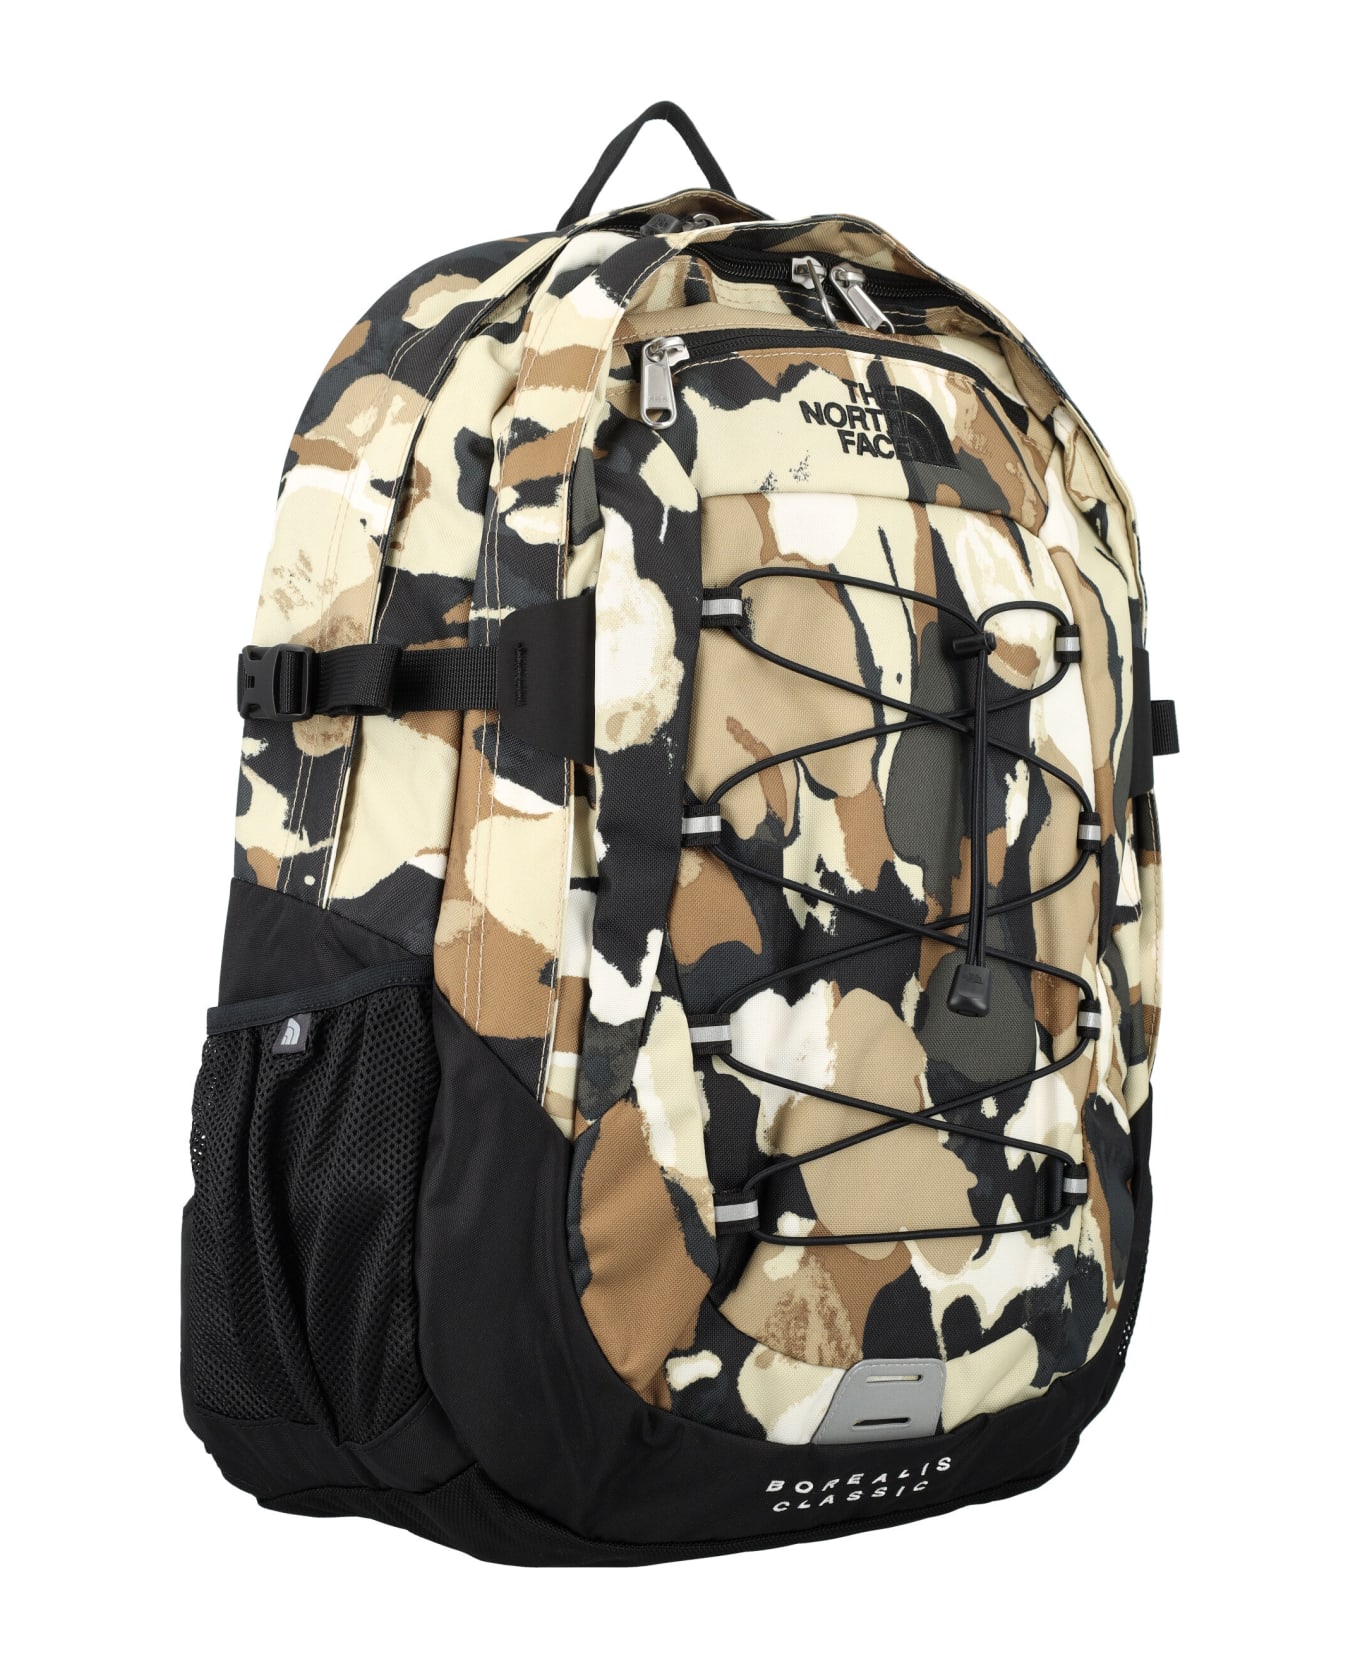 The North Face Borealis Classic Backpack - MULTICOLOR バックパック